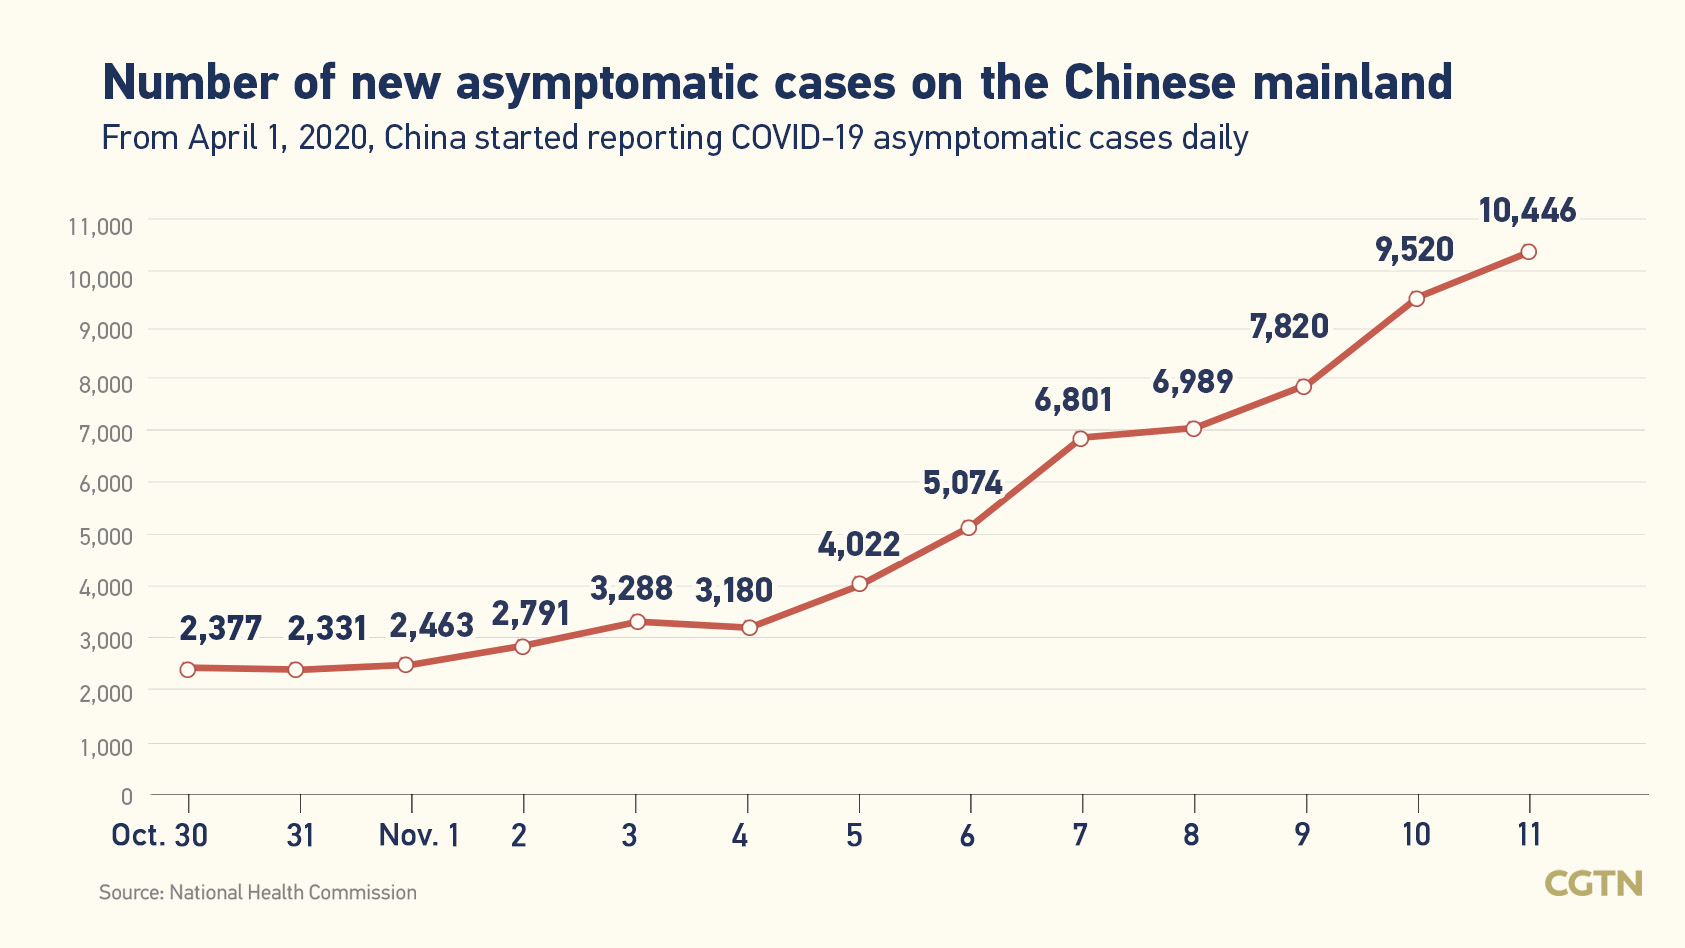 Chinese mainland records 1,504 new confirmed COVID-19 cases